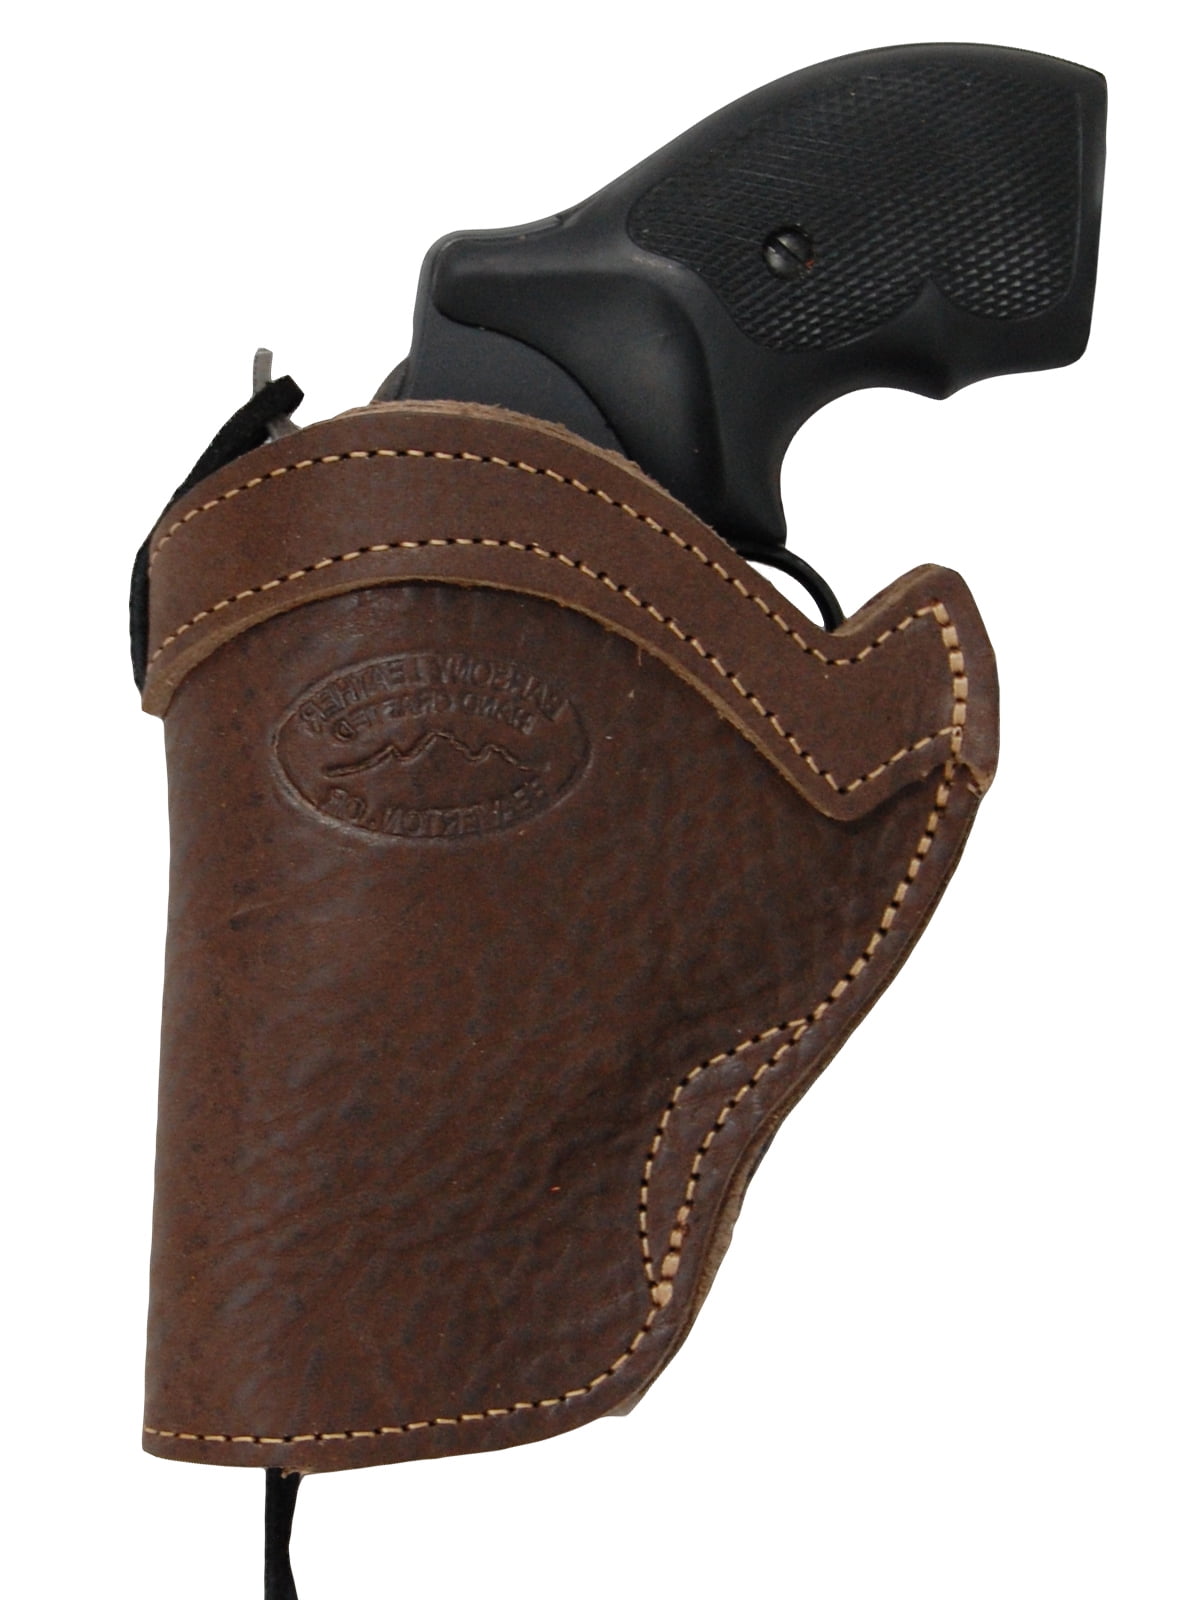 NEW Barsony Tan Leather Western Style Gun Holster for Taurus 6" Revolvers 